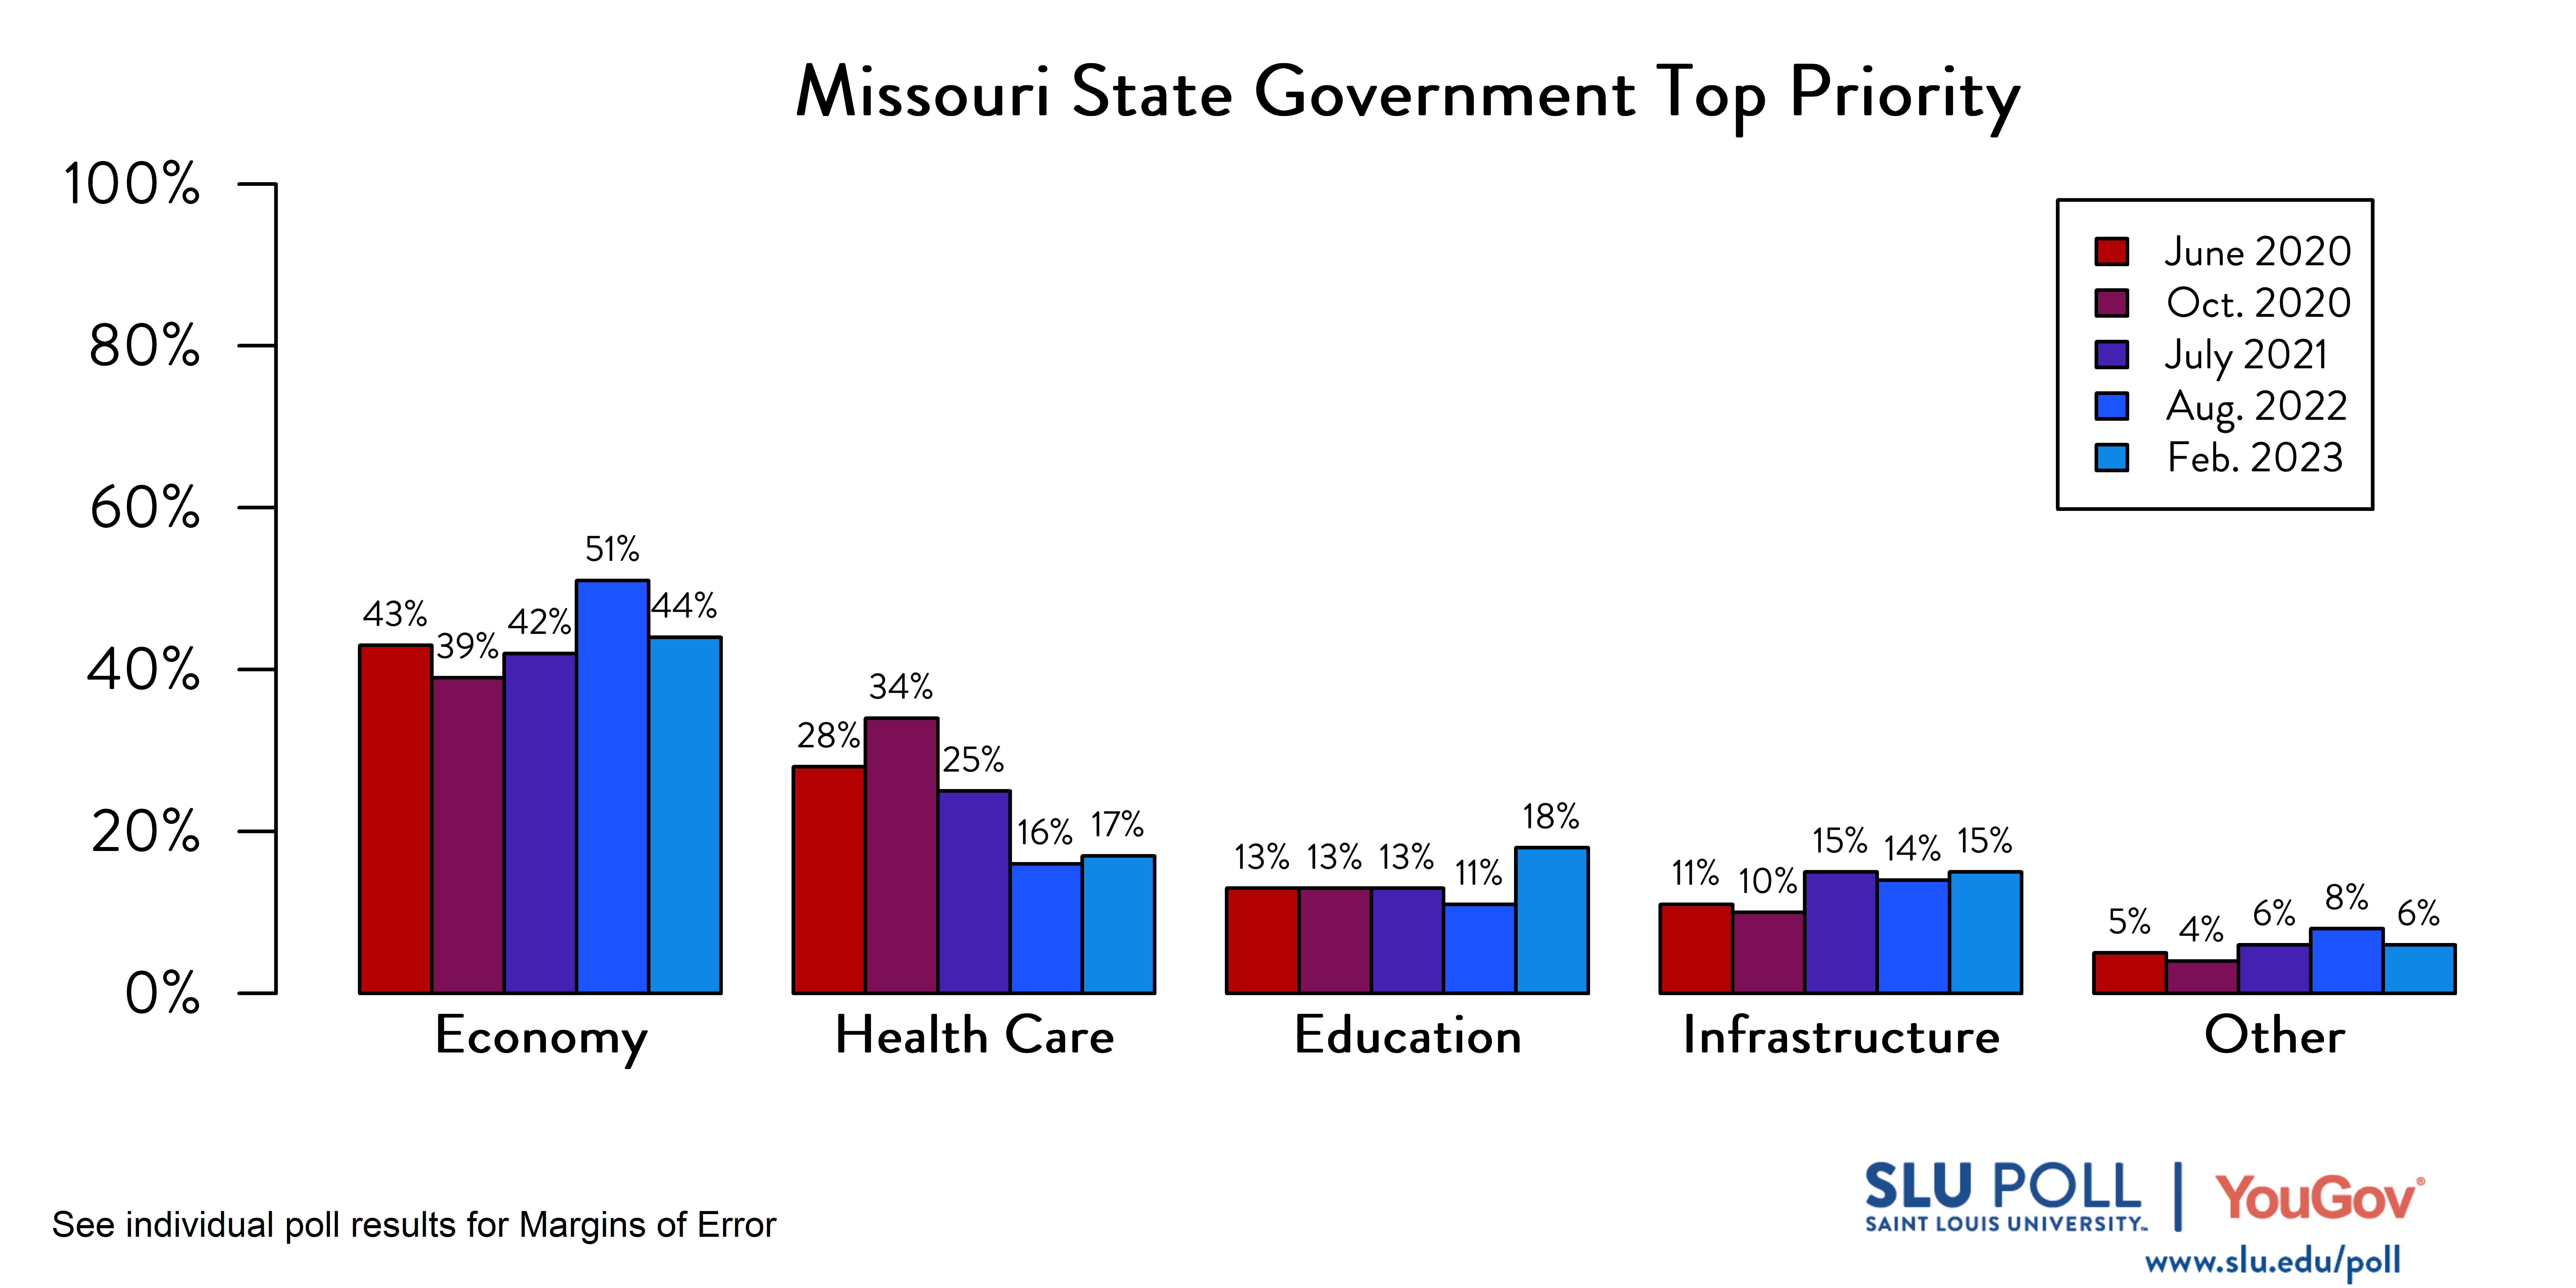 Likely voters' responses to 'Which of the following do you think should be the TOP priority of the Missouri state government?'. June 2020 Voter Responses 43% Economy, 28% Health Care, 13% Education, 11% Infrastructure, and 5% Other. October 2020 Voter Responses: 39% Economy, 34% Health care, 13% Education, 10% Infrastructure, and 4% Other. July 2021 Voter Responses: 42% Economy, 25% Health care, 13% Education, 15% Infrastructure, and 6% Other. August 2022 Voter Responses: 51% Economy, 16% Health care, 11% Education, 14% Infrastructure, and 8% Other. February 2023 Voter Responses: 44% Economy, 17% Health care, 18% Education, 15% Infrastructure, and 6% Other.